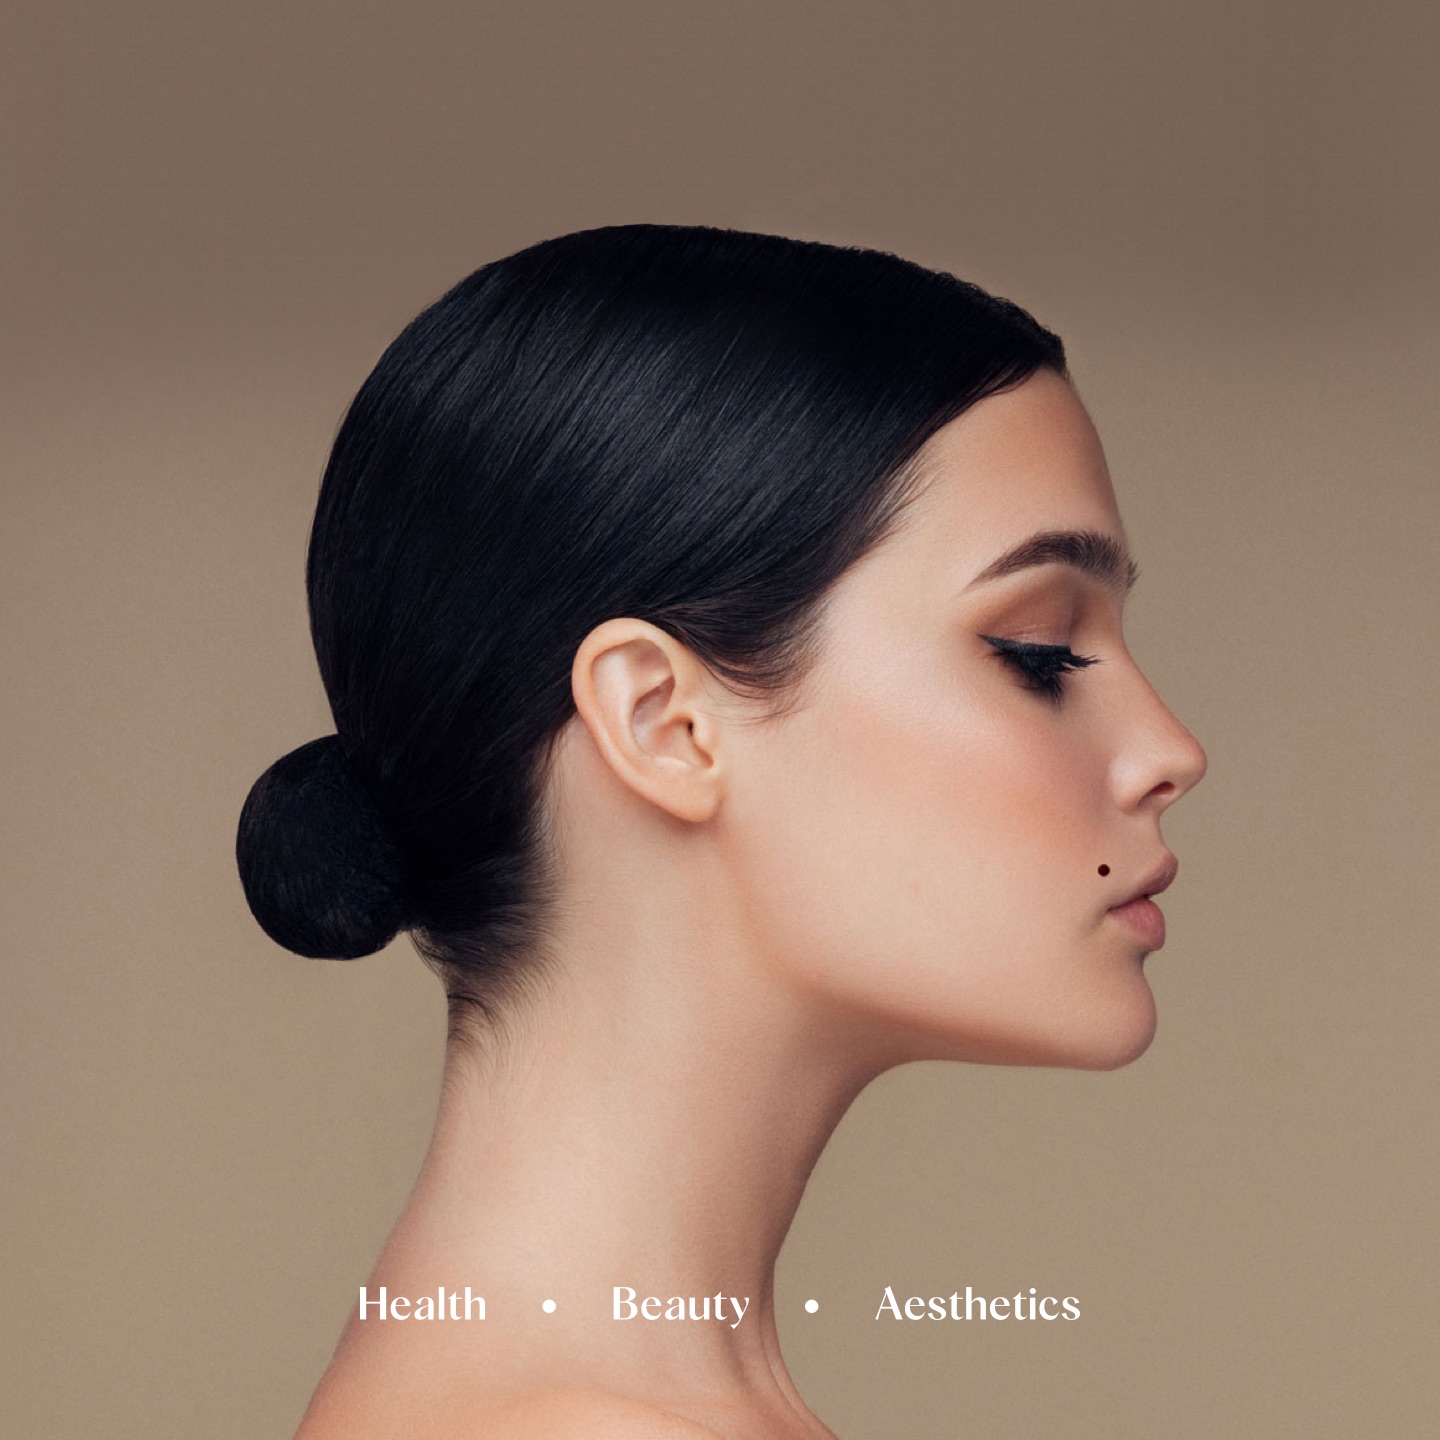 A keyvisuals of med and skin – Young white woman in profile view